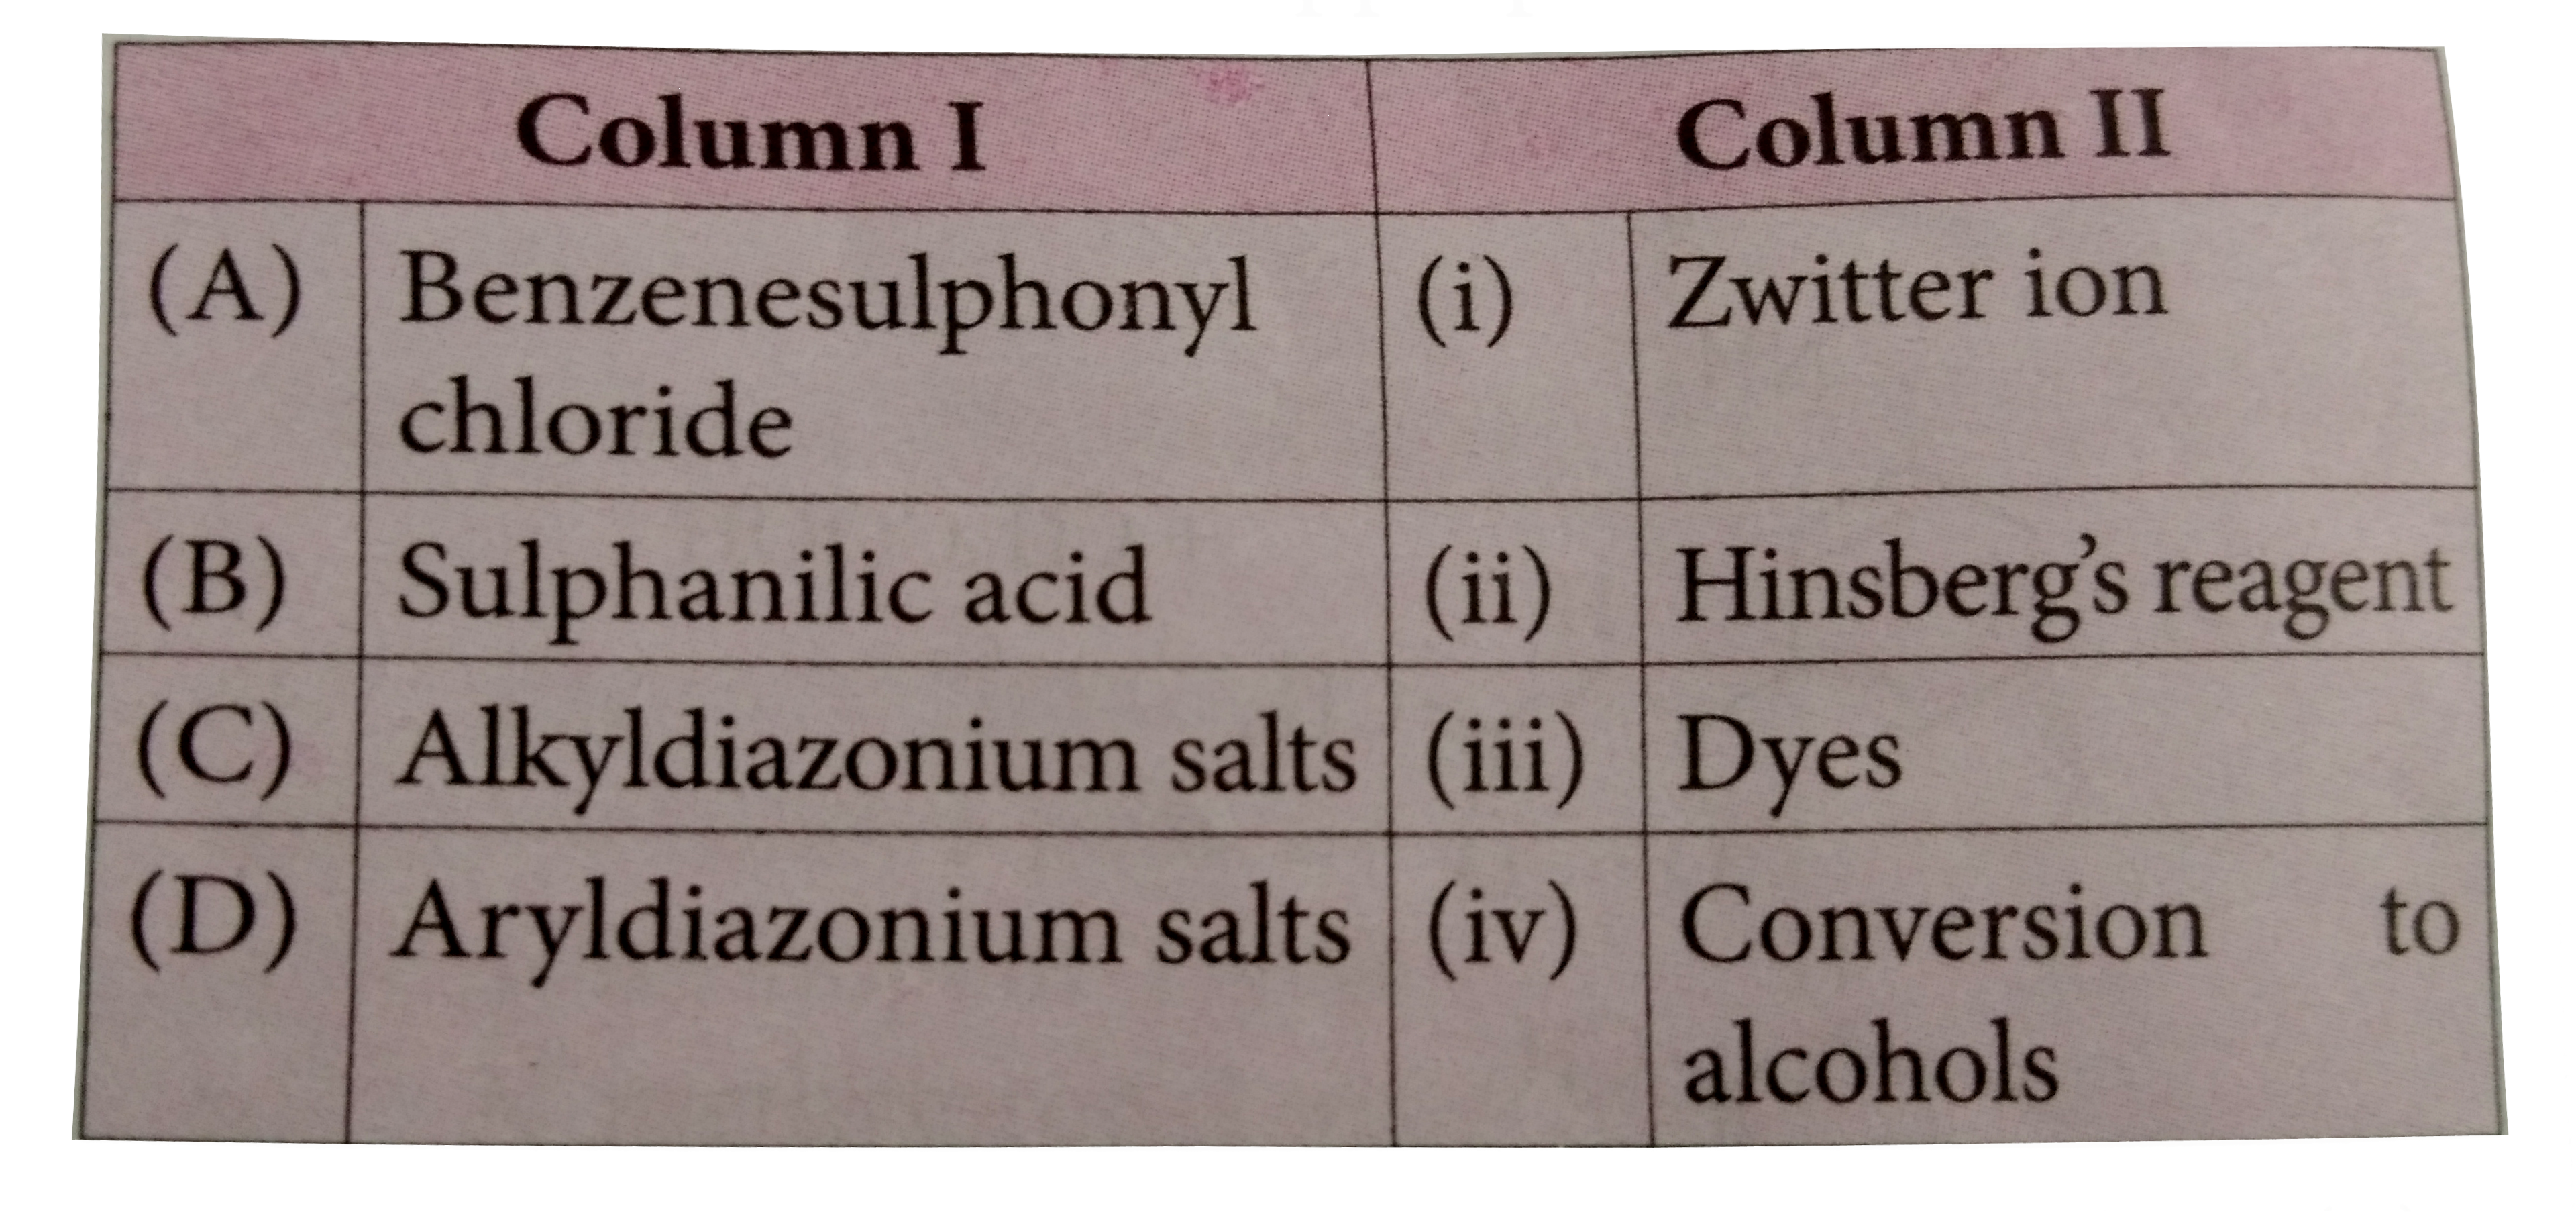 Match the compounds given in column I with column II and mark the appropriate choice.